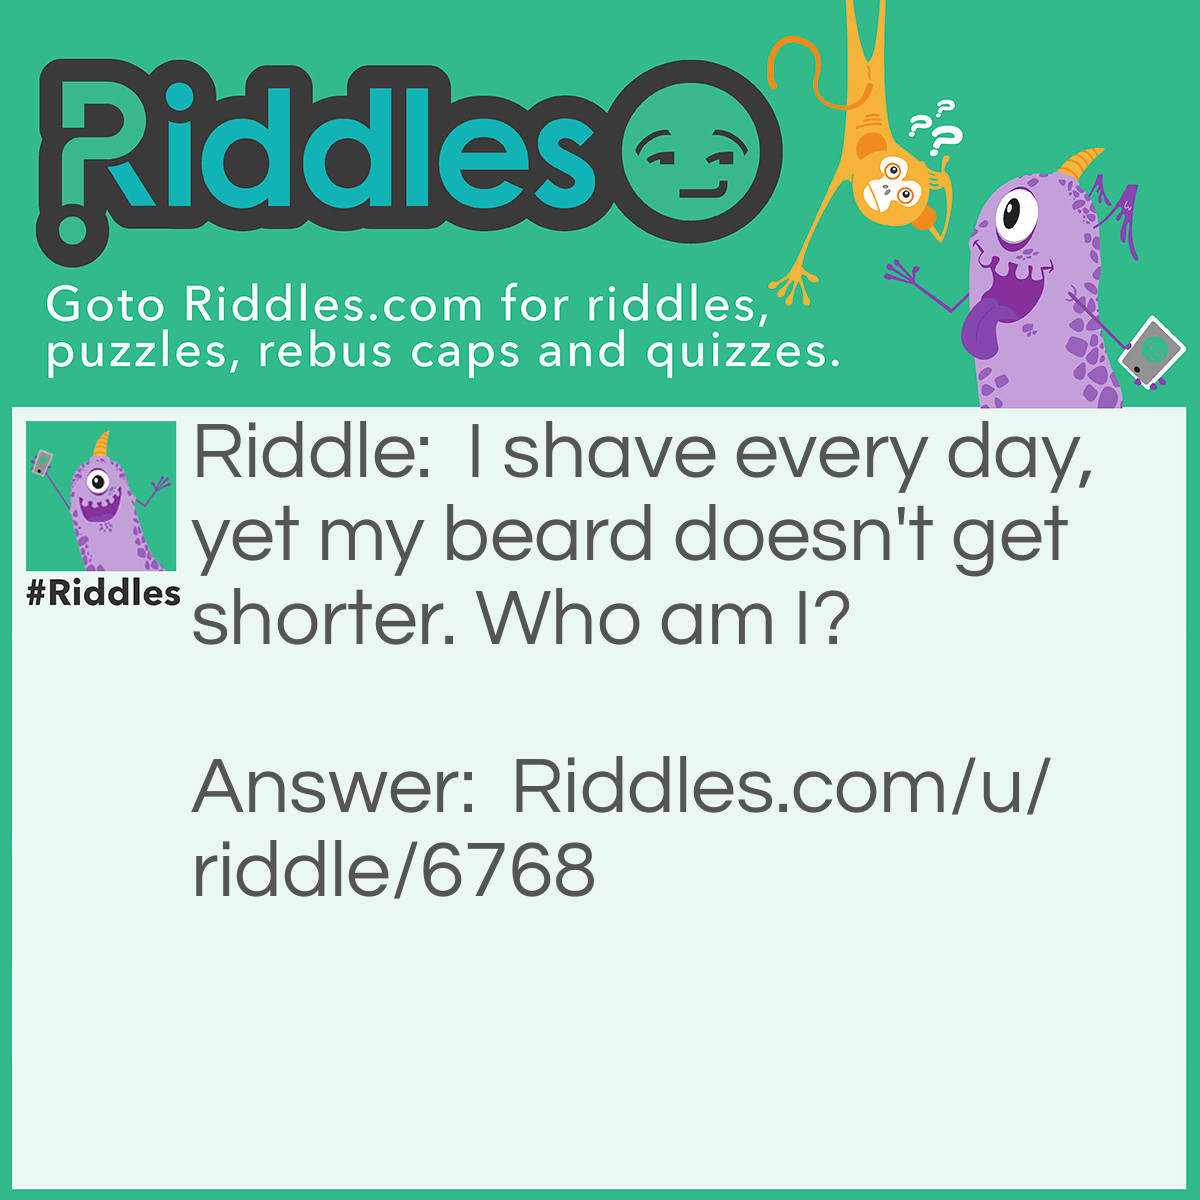 Riddle: I shave every day, yet my beard doesn't get shorter. Who am I? Answer: A barber.